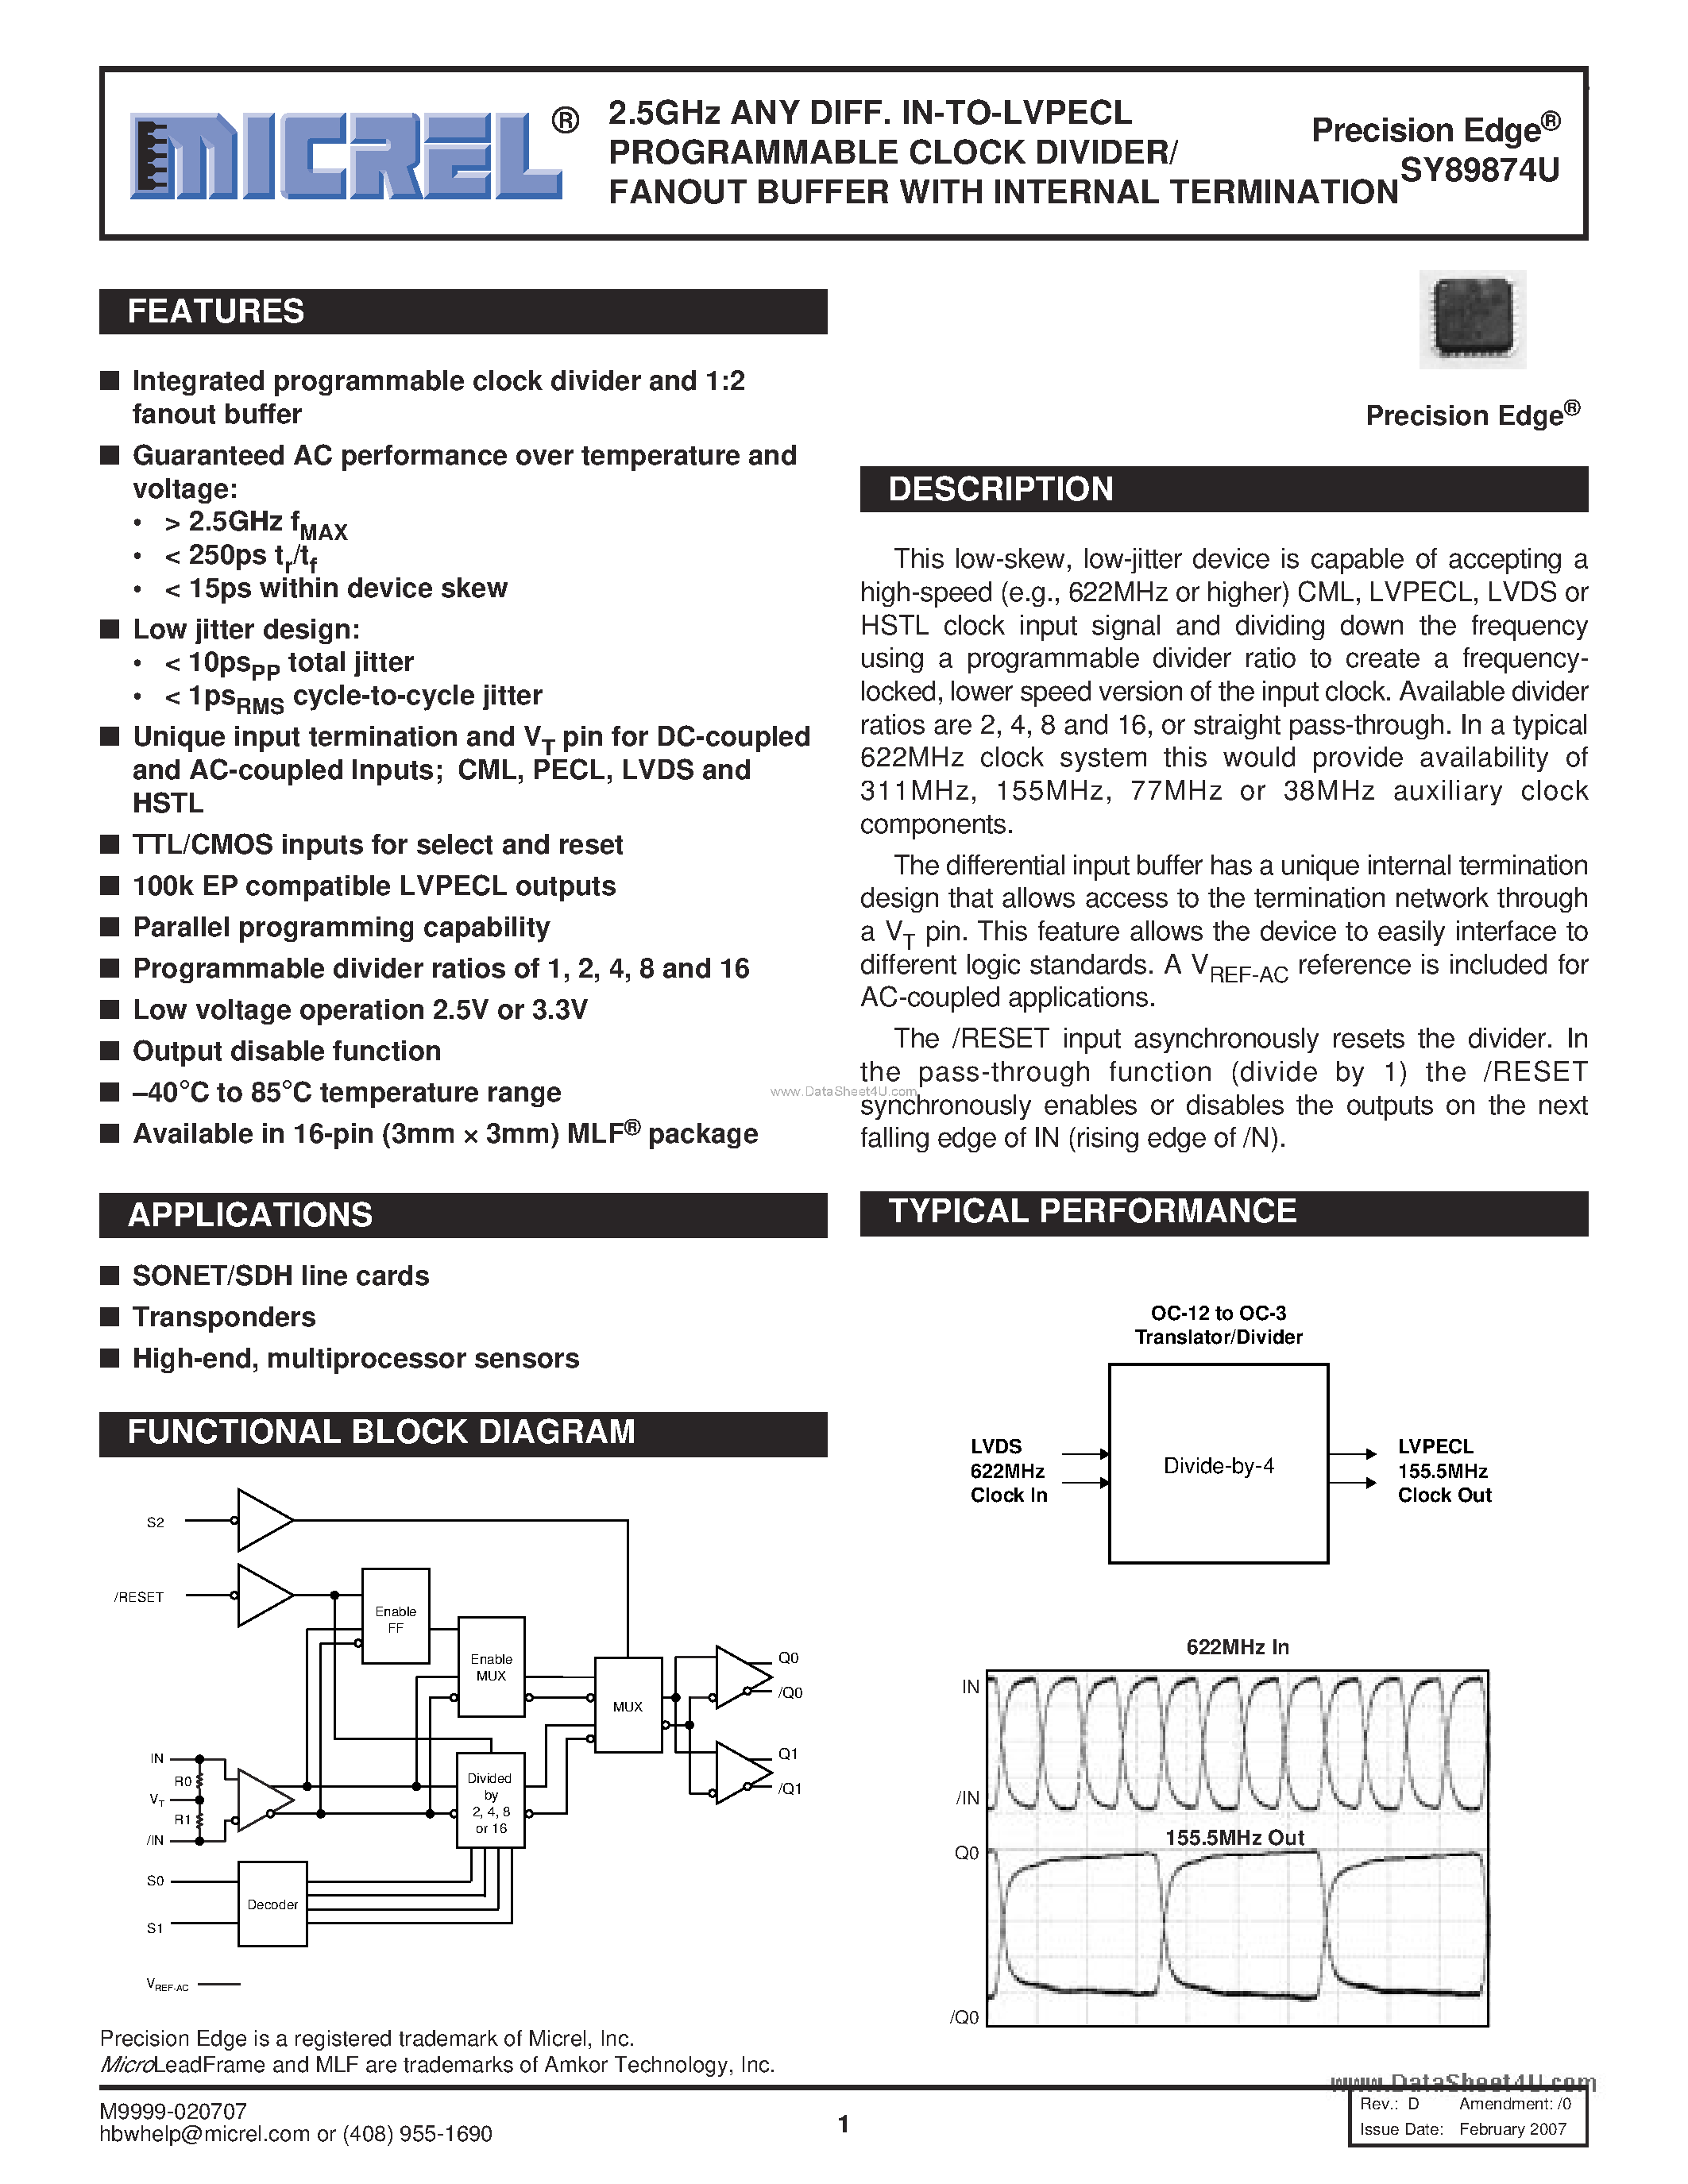 Datasheet SY89874U - IN-TO-LVPECL PROGRAMMABLE CLOCK DIVIDER/FANOUT BUFFER page 1